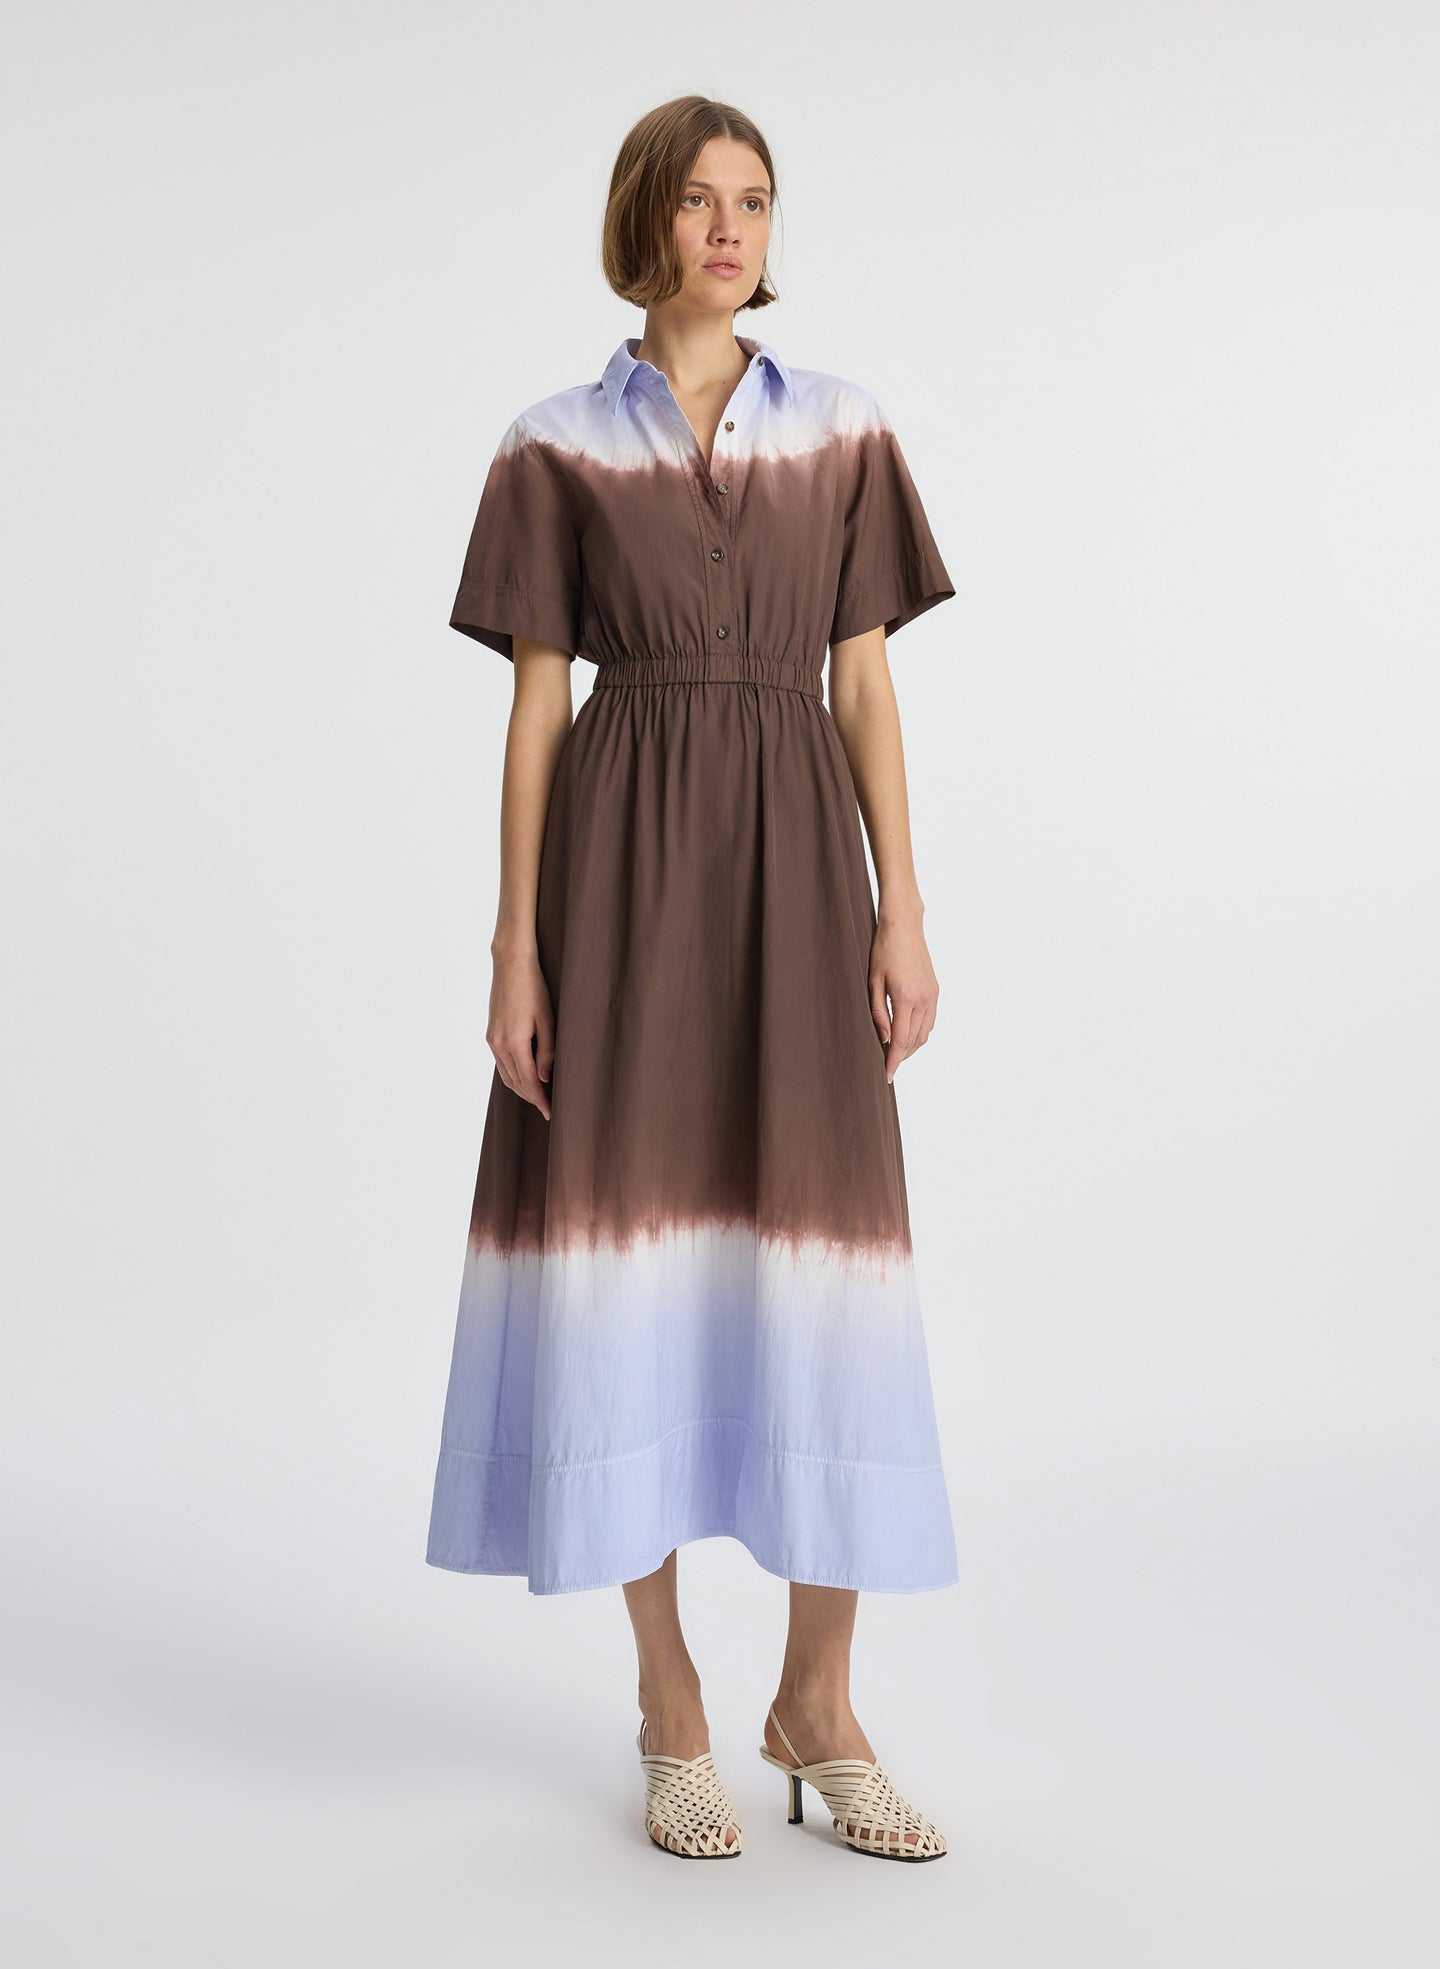 front view of woman wearing brown and light blue dip dye shirtdress